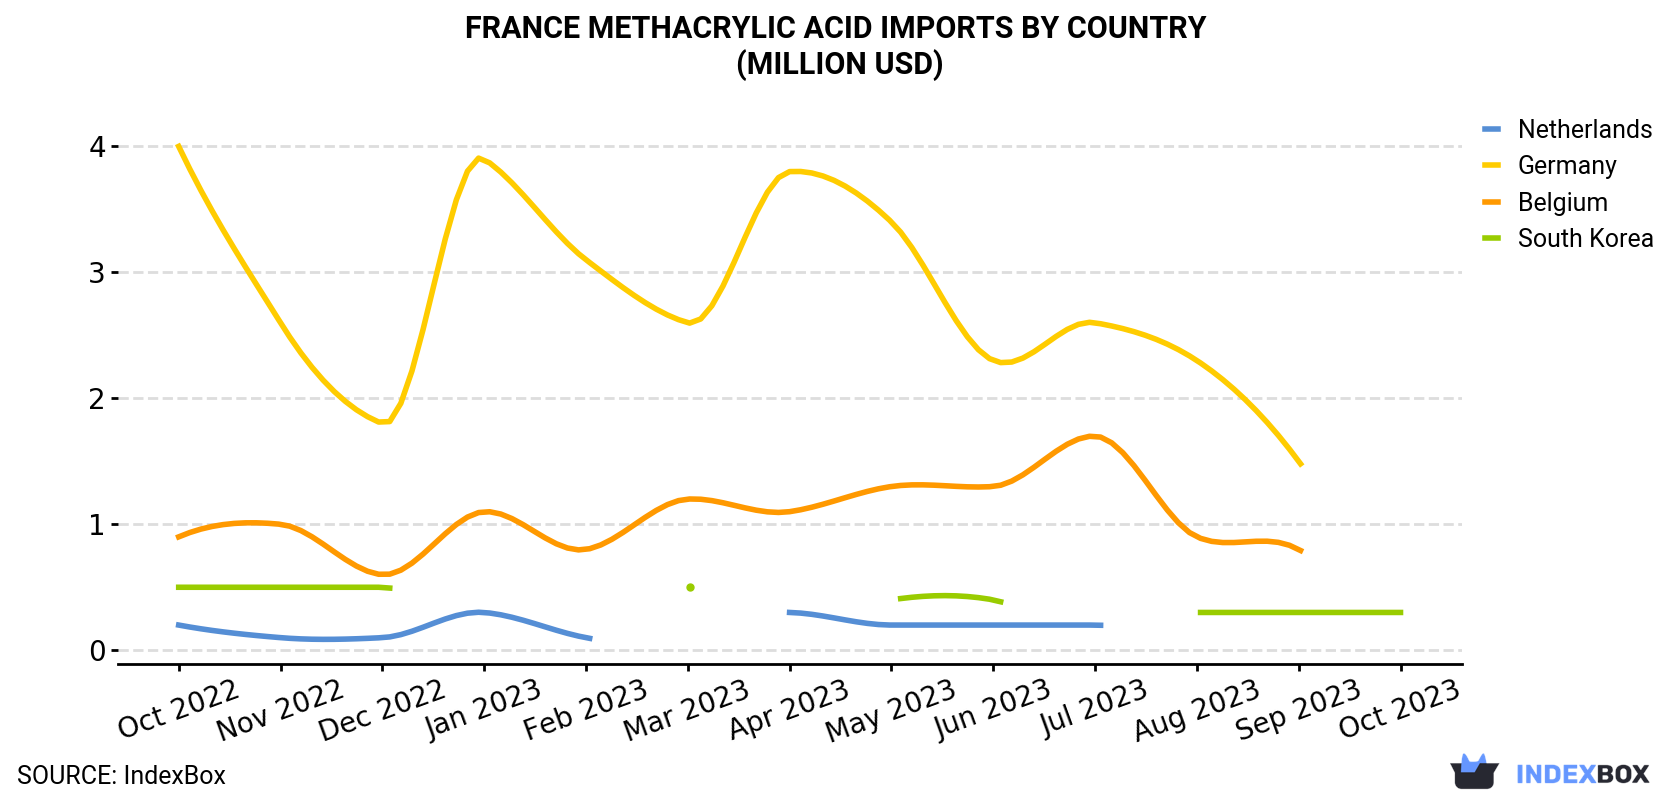 France Methacrylic Acid Imports By Country (Million USD)